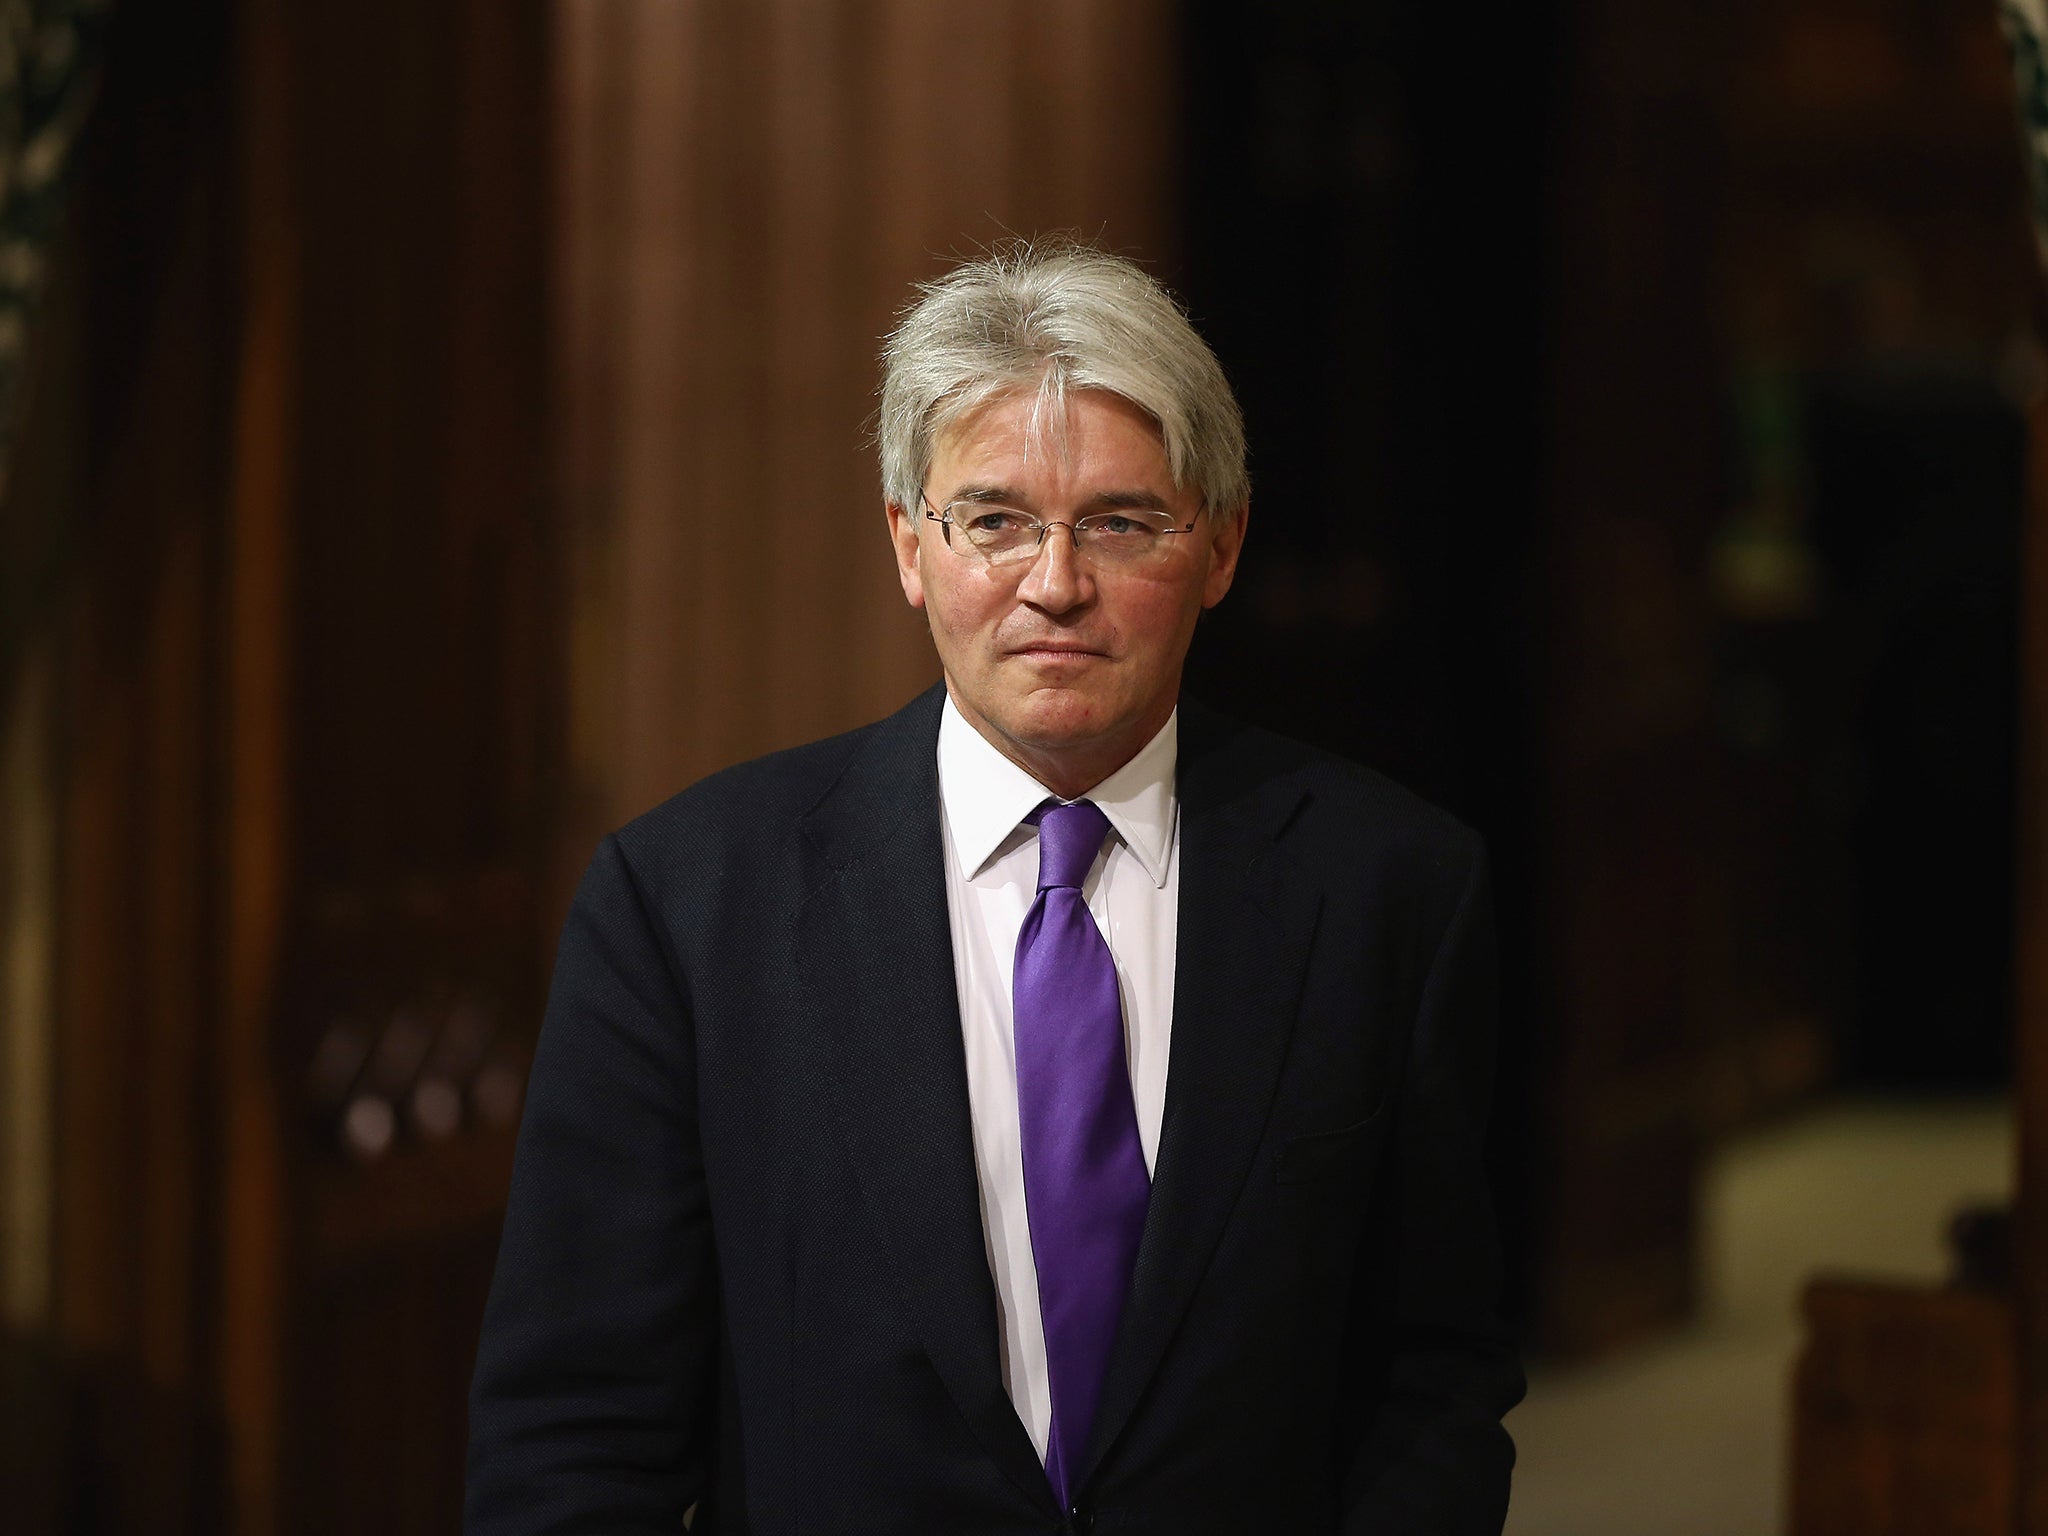 Andrew Mitchell, the Tory MP at the centre of the Plebgate affair, declared £103,000